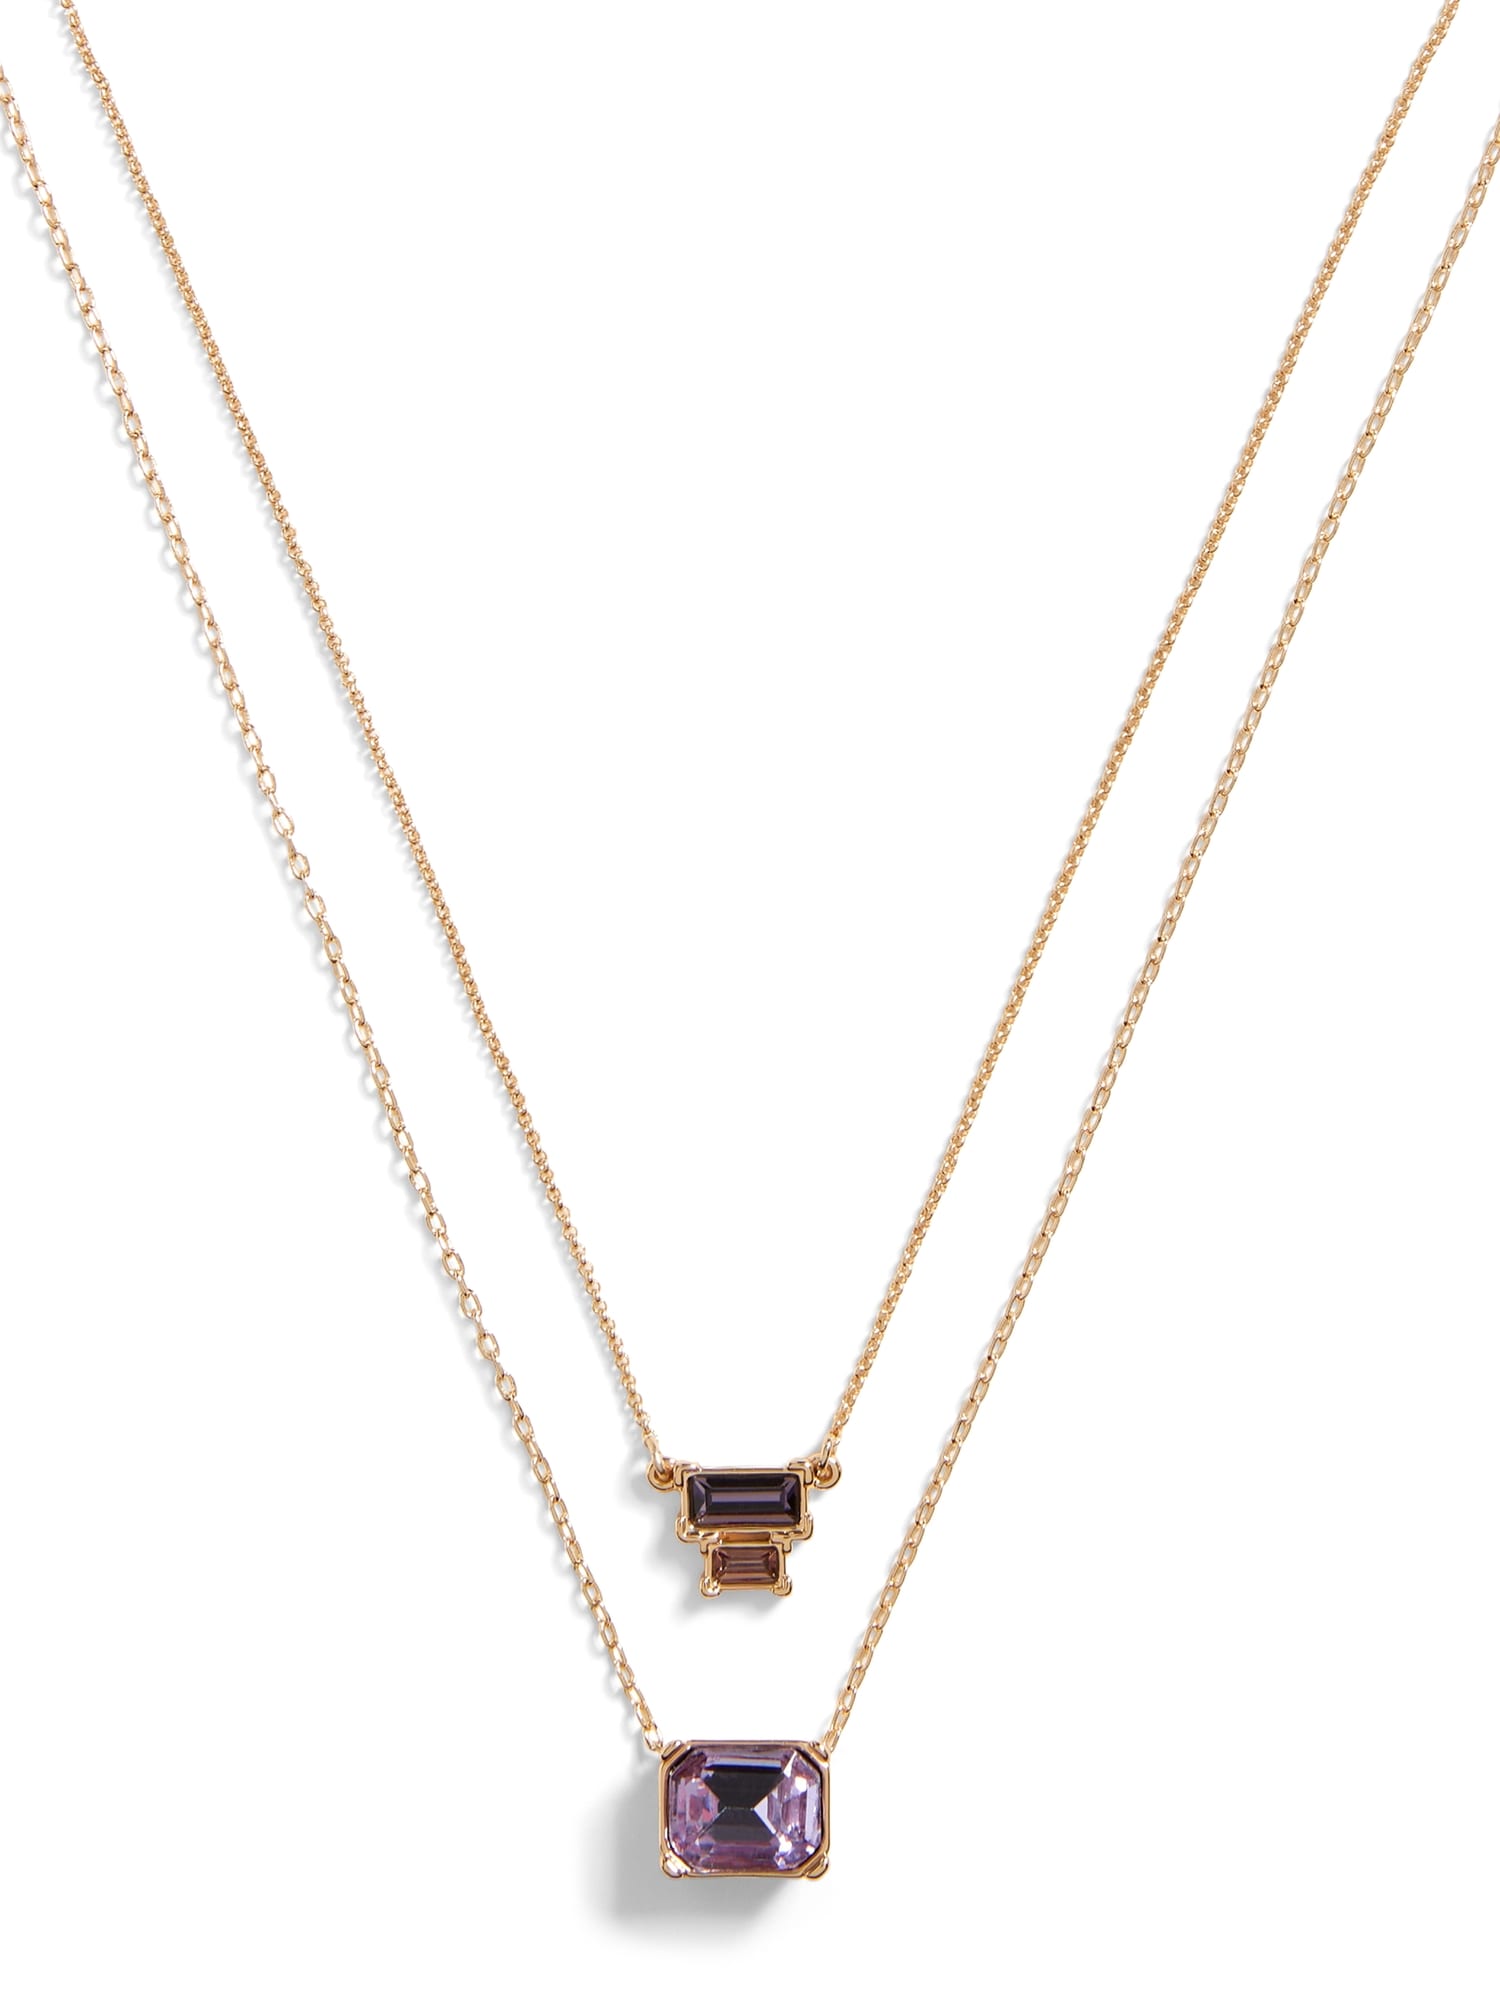 Delicate Gem Layered Necklace